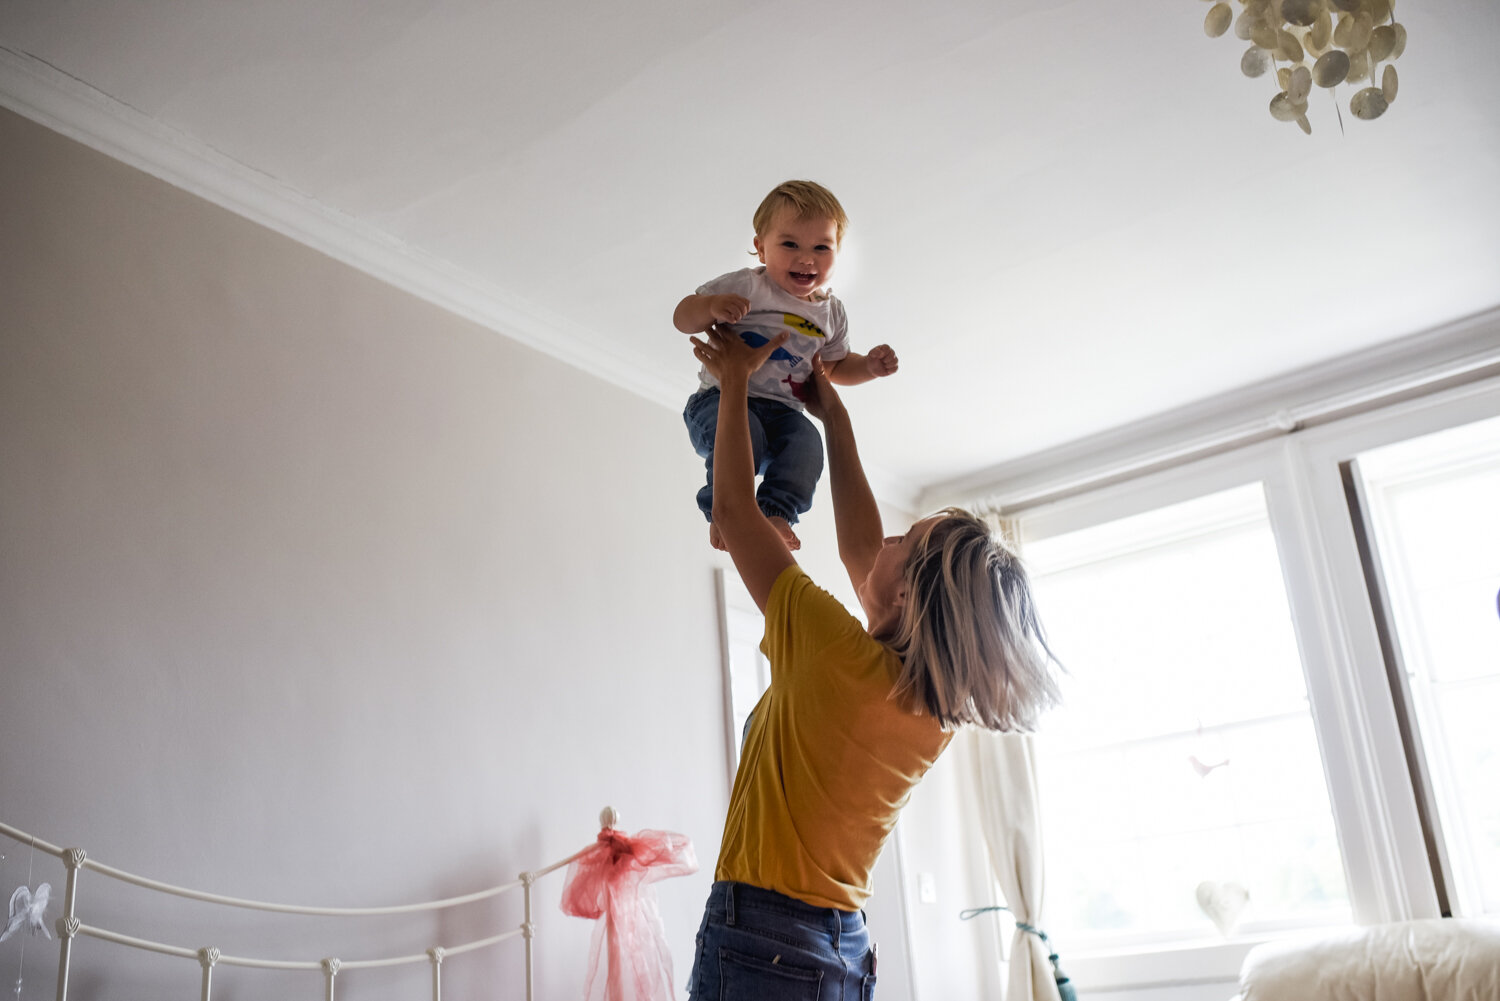  A mother throws her baby up into the air in her bedroom and the baby laughs joyfully during this at-home family session in Bath, Somerset. 